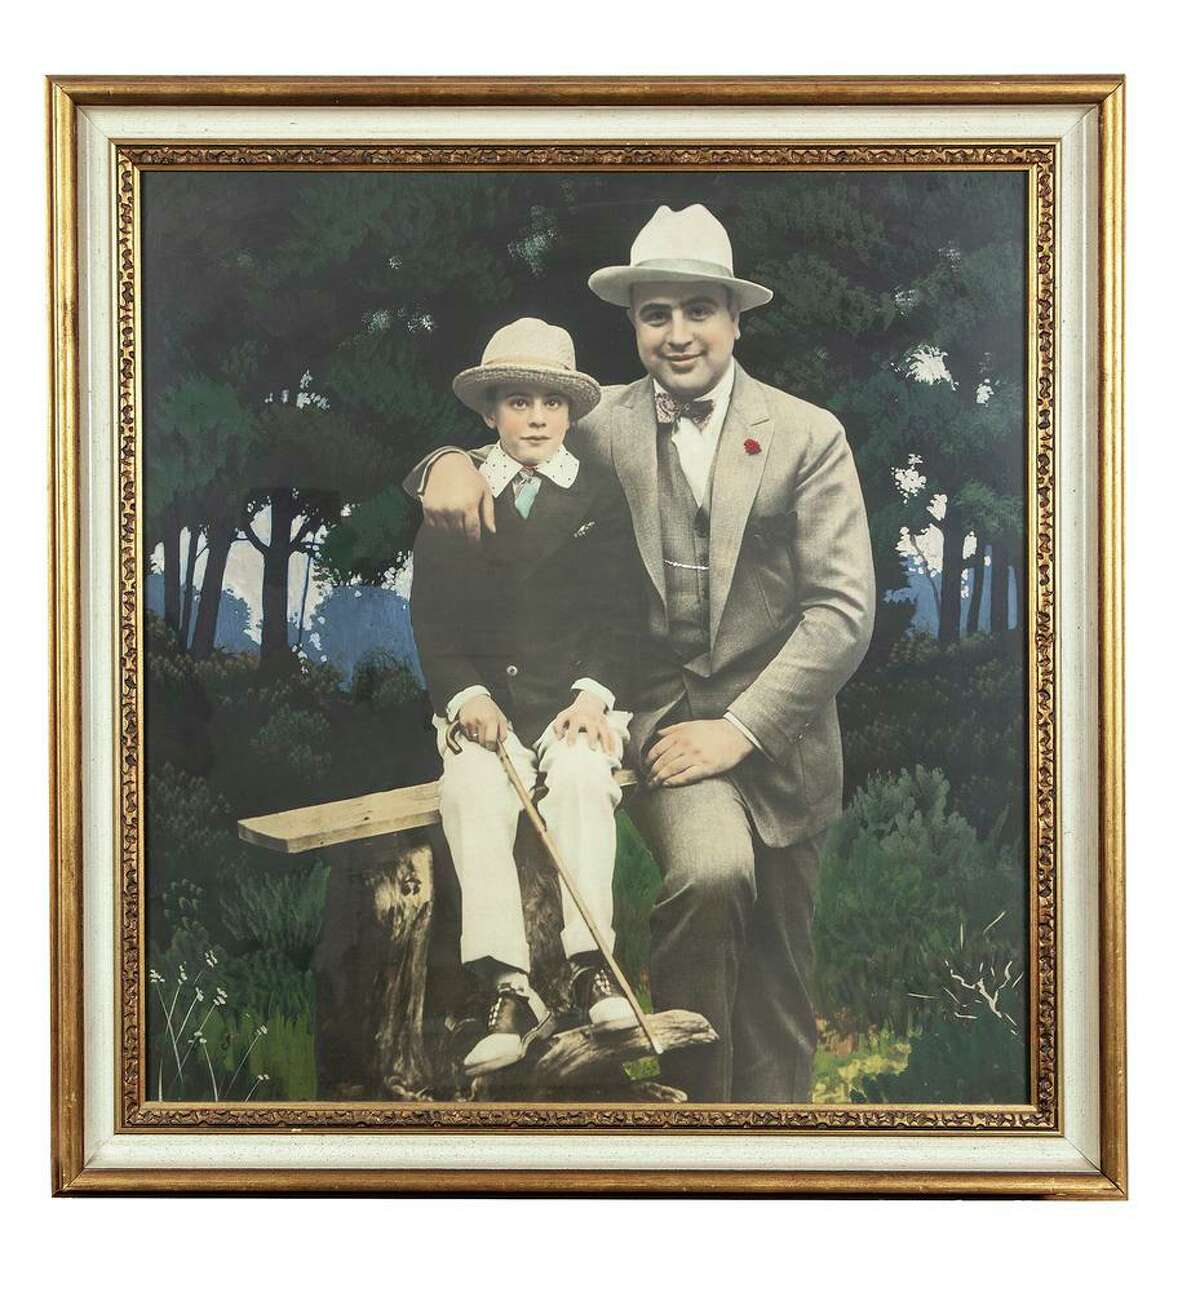 A hand-colored silver print of Al Capone and Sonny Capone is one of the items going up for auction.